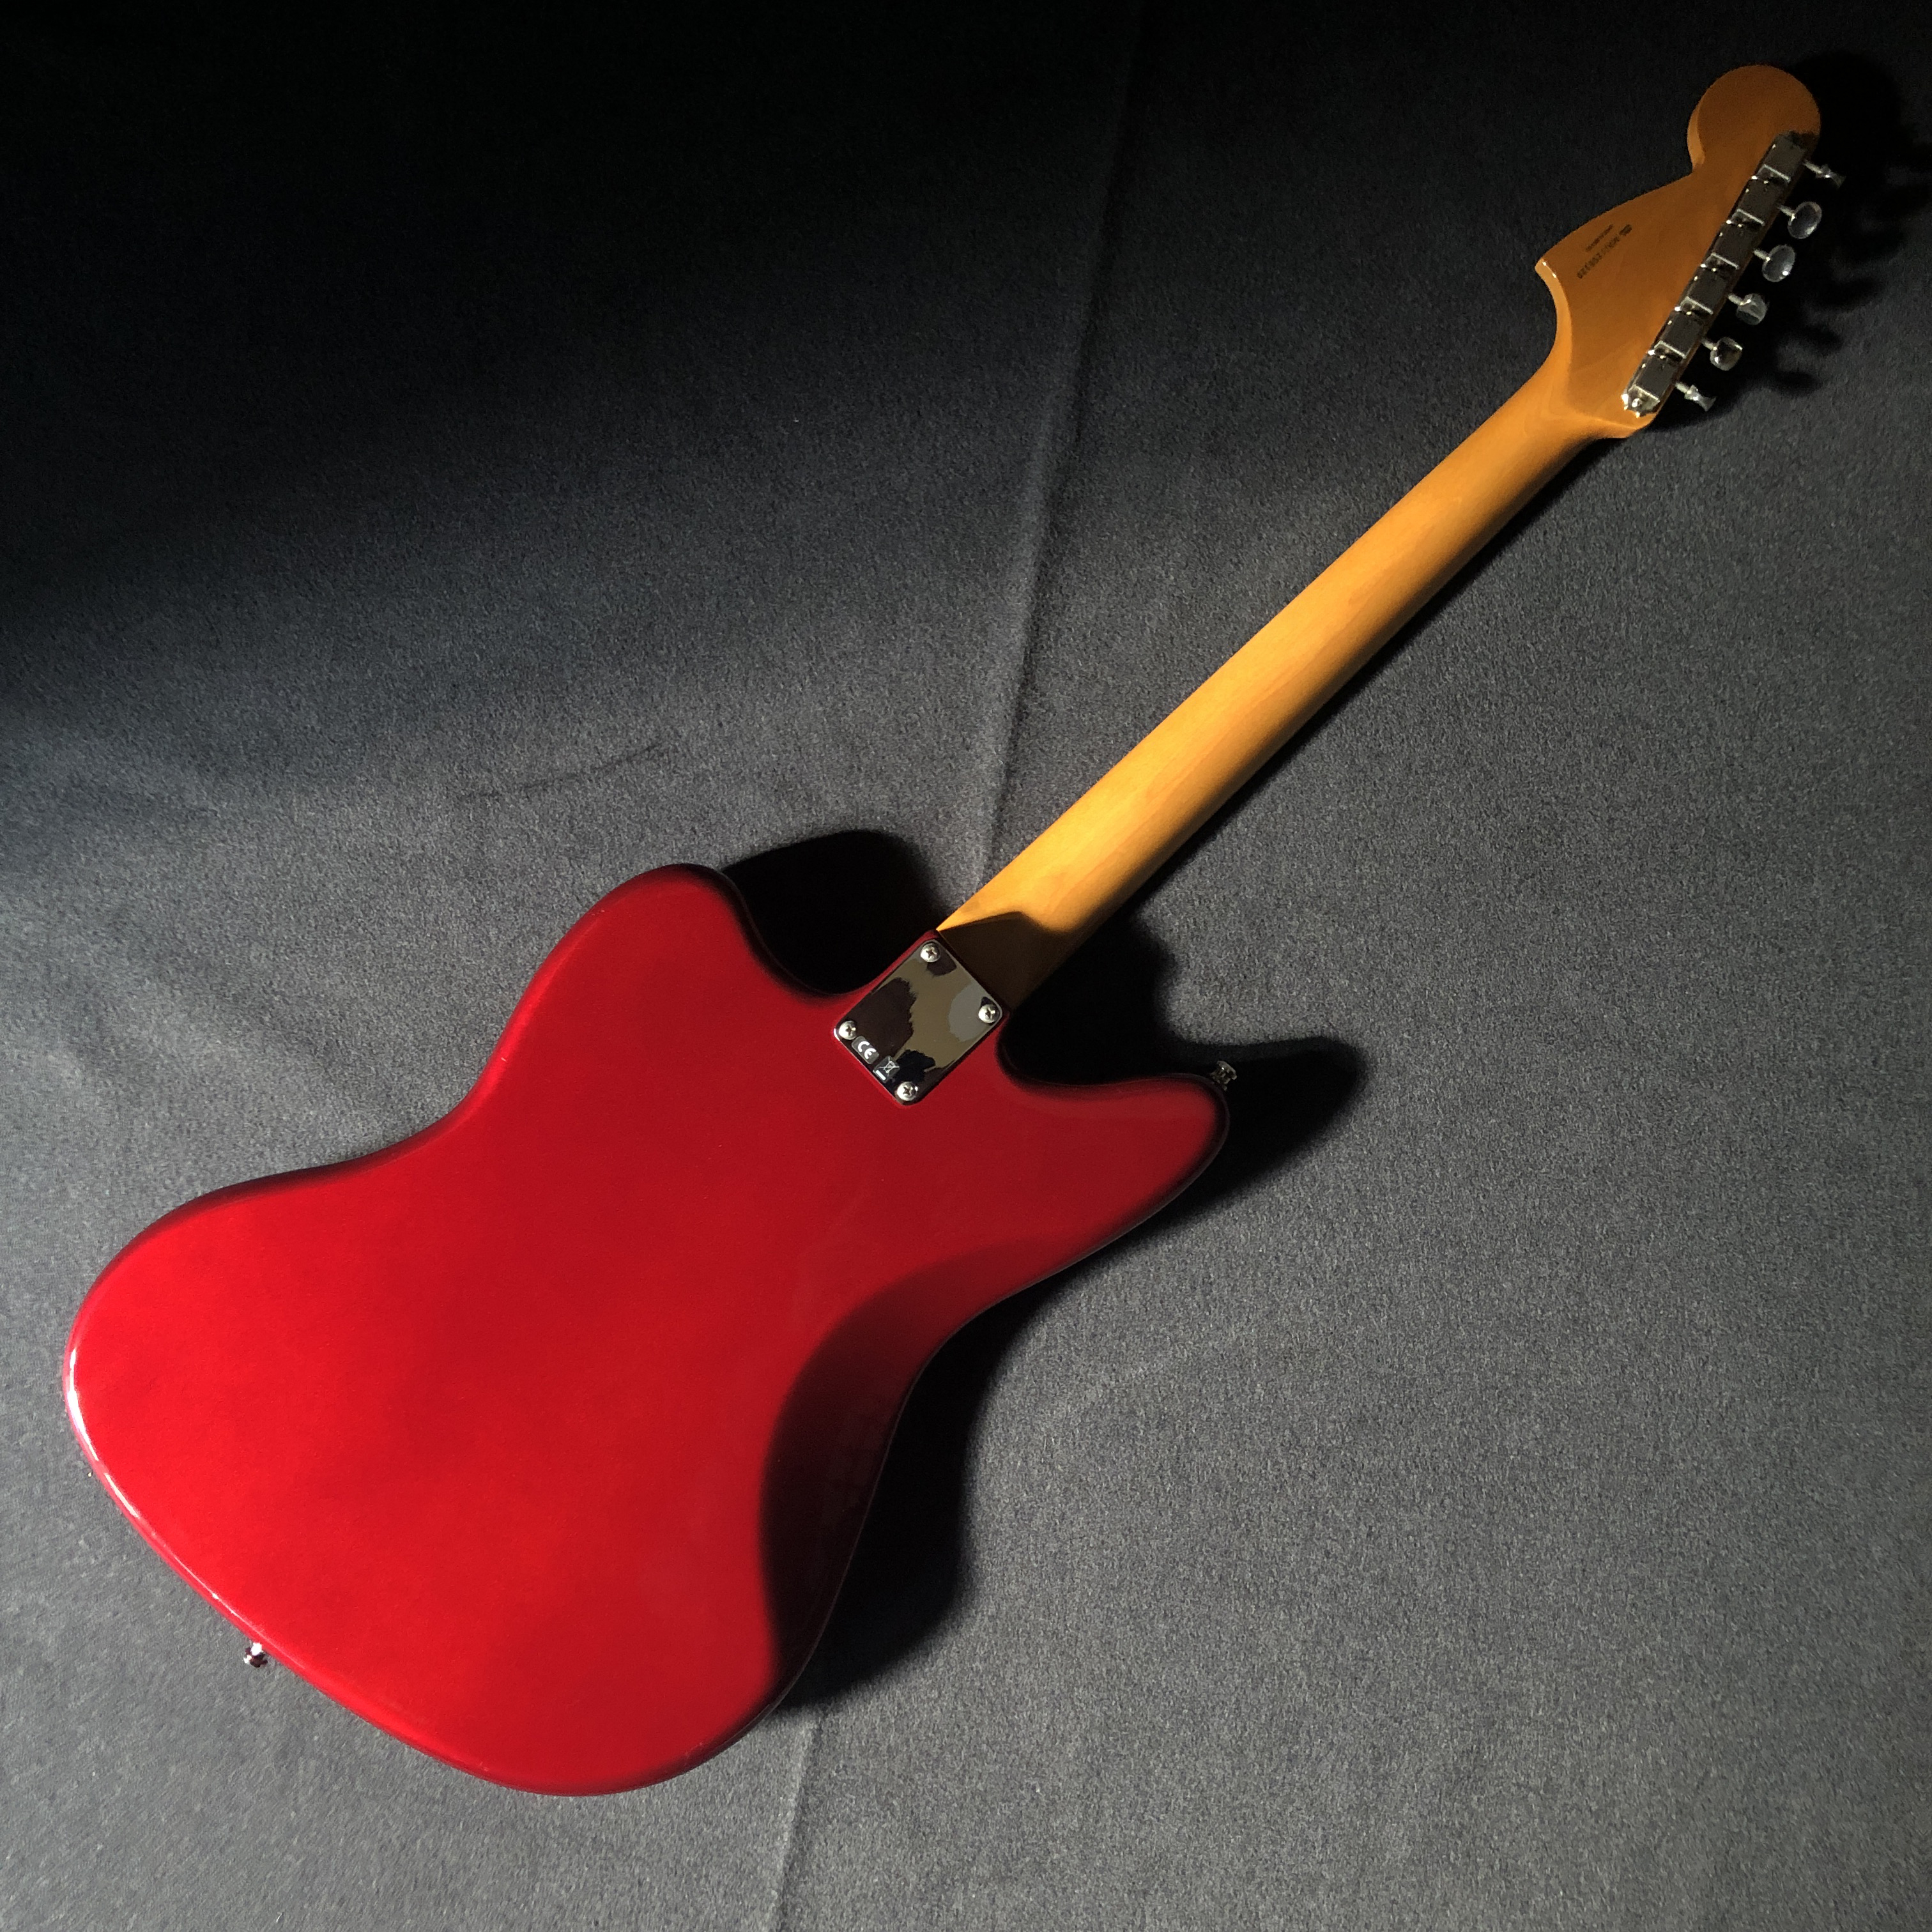 SOLD】Fender Mexico Classic Player Jaguar Special Candy Apple Red